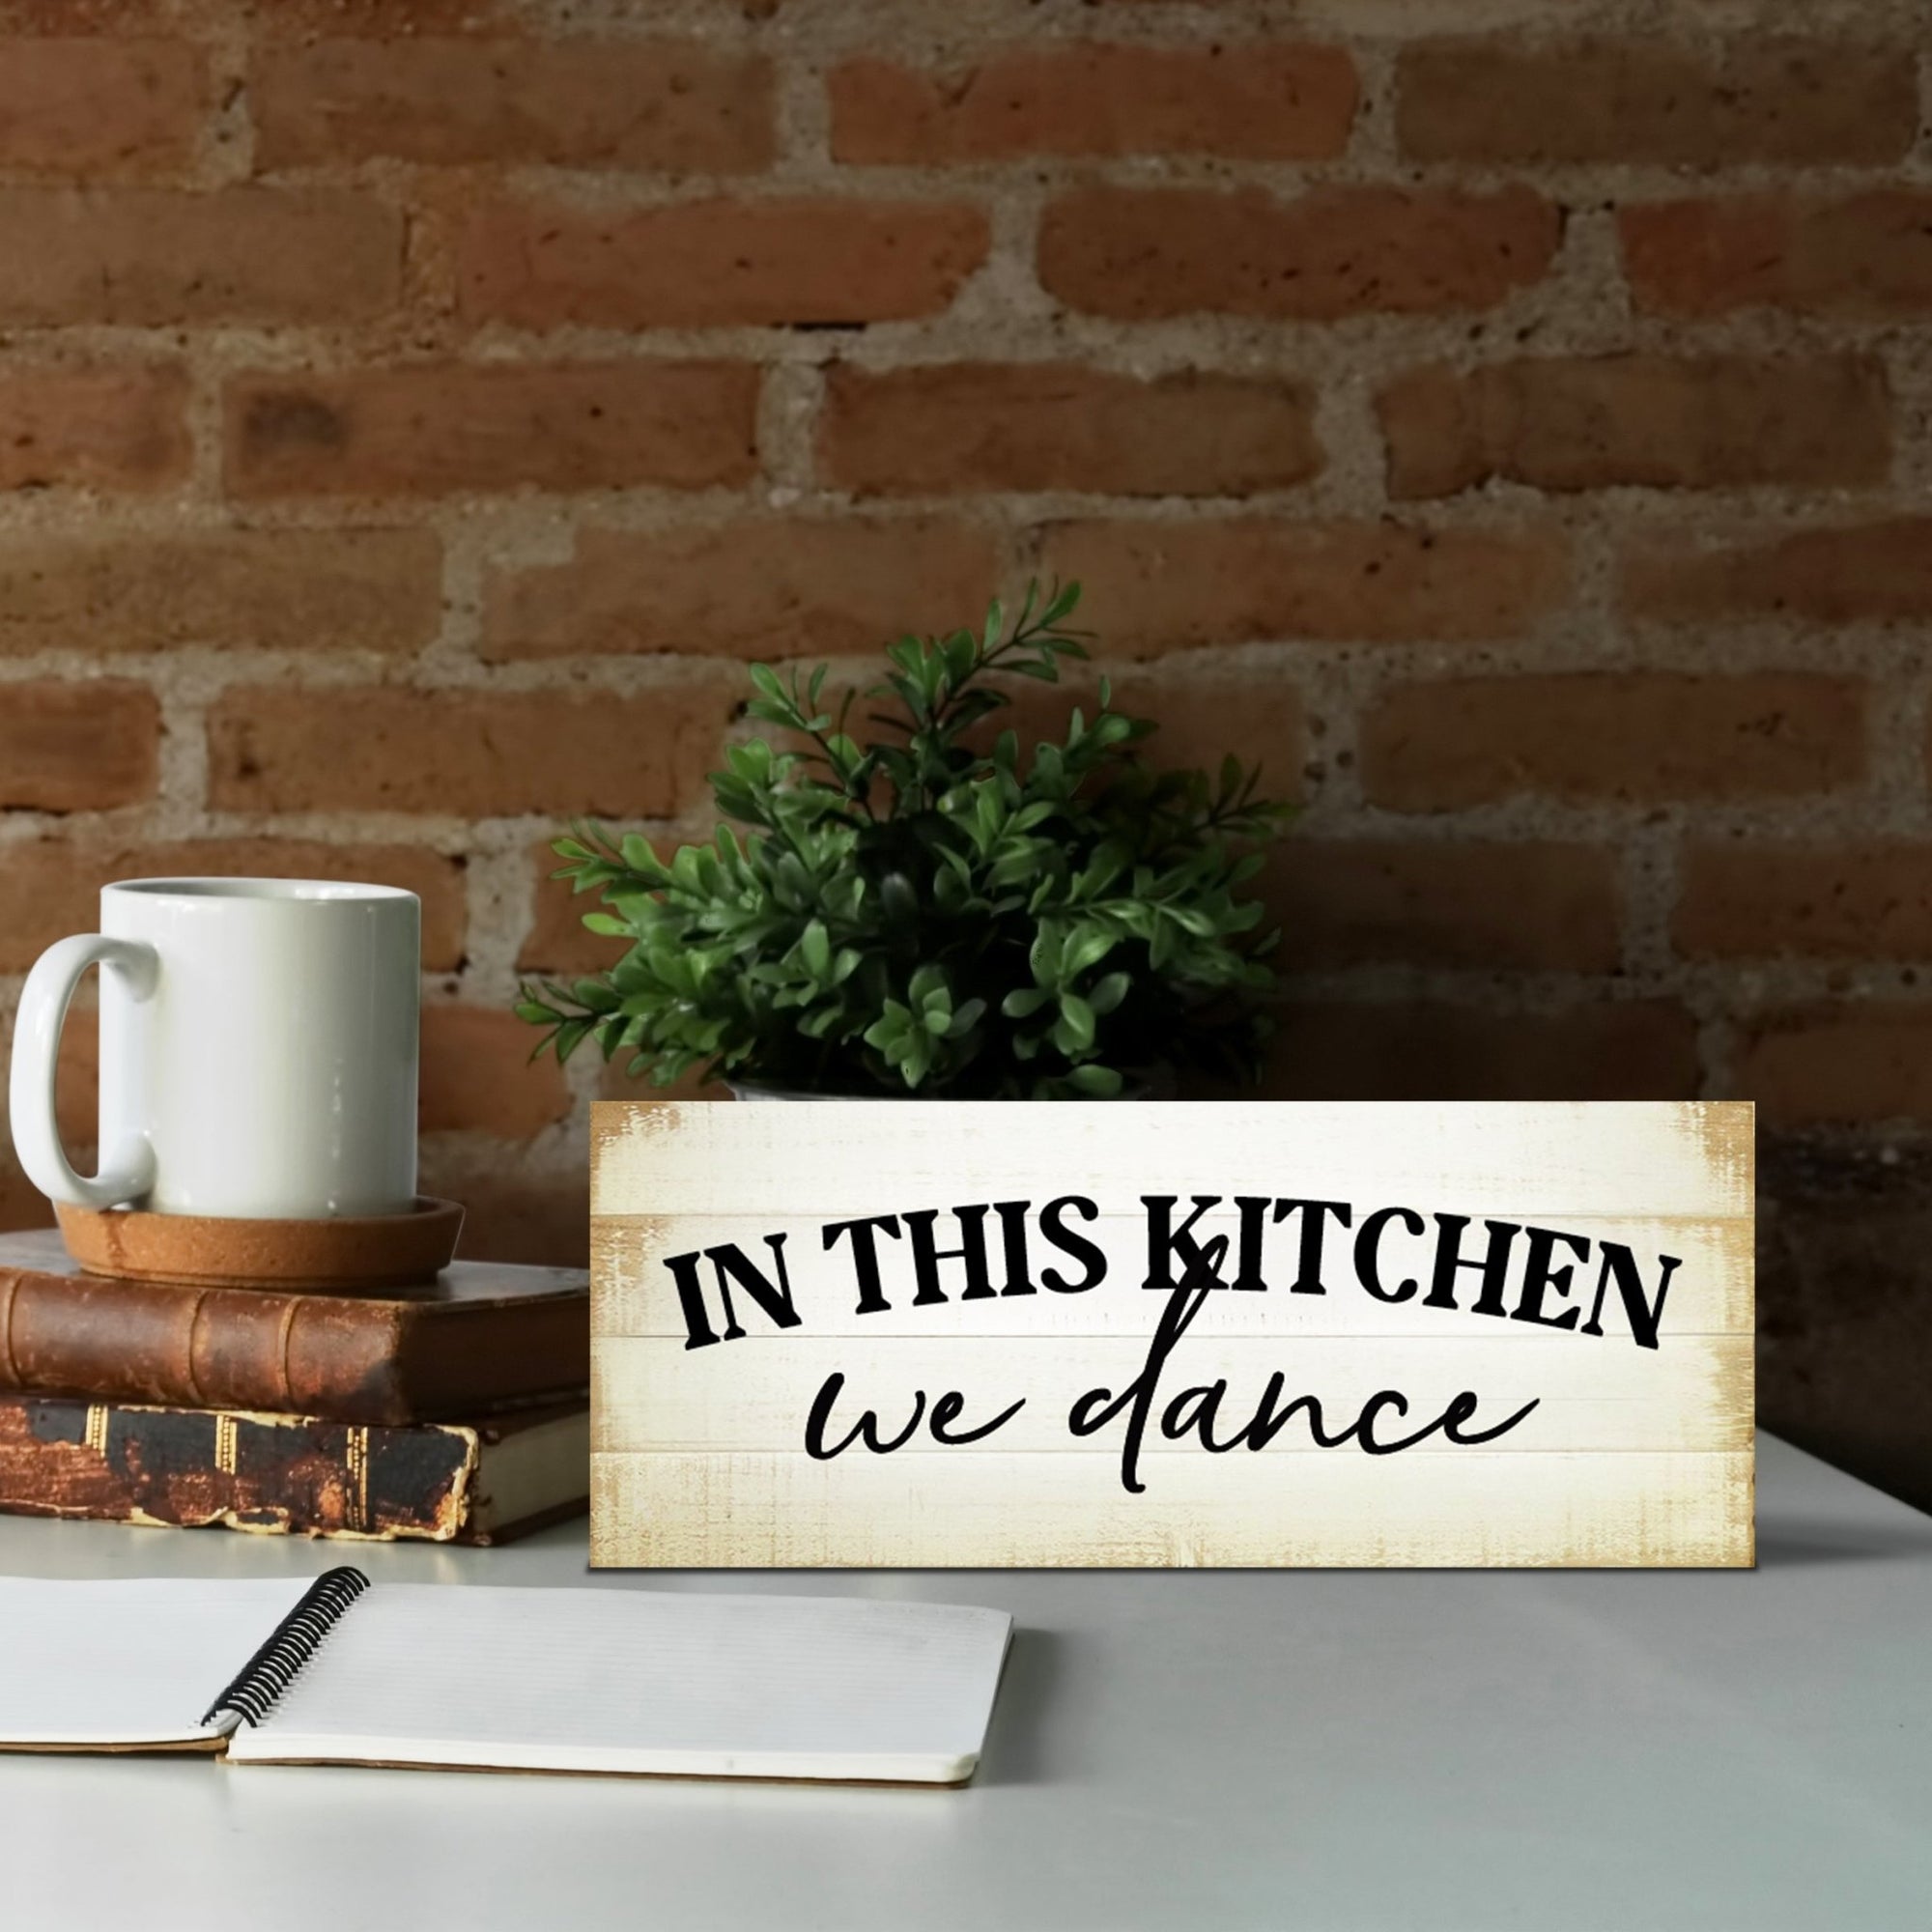 Inspirational Wooden Wall Hanging Plaque Kitchen Home Décor For All Season Decoration In This Kitchen We Dance 